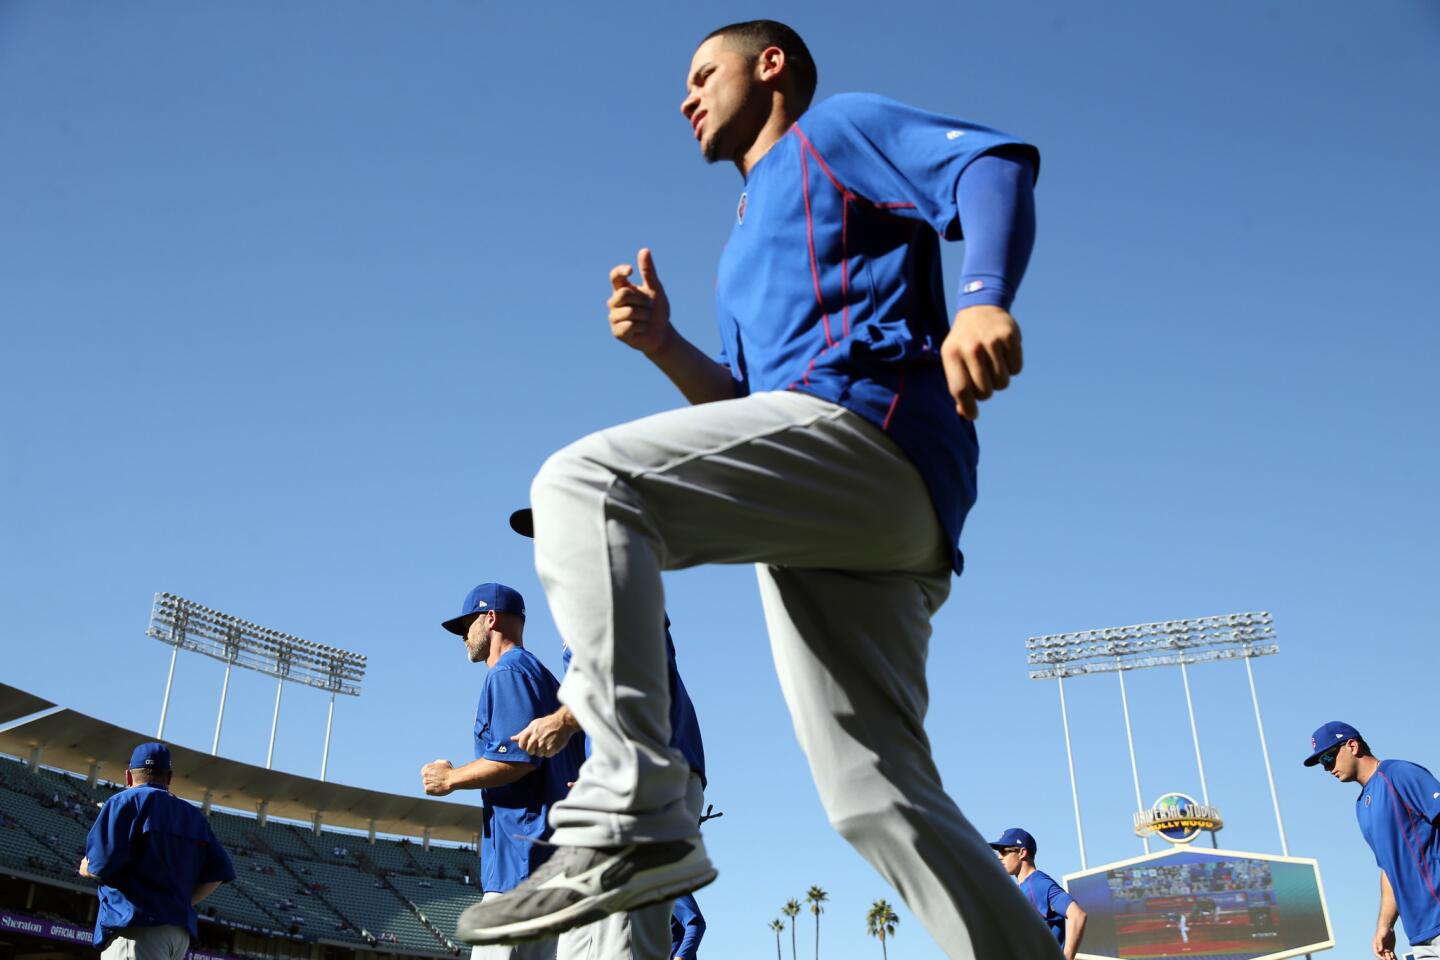 NLCS Game 4: Cubs at Dodgers